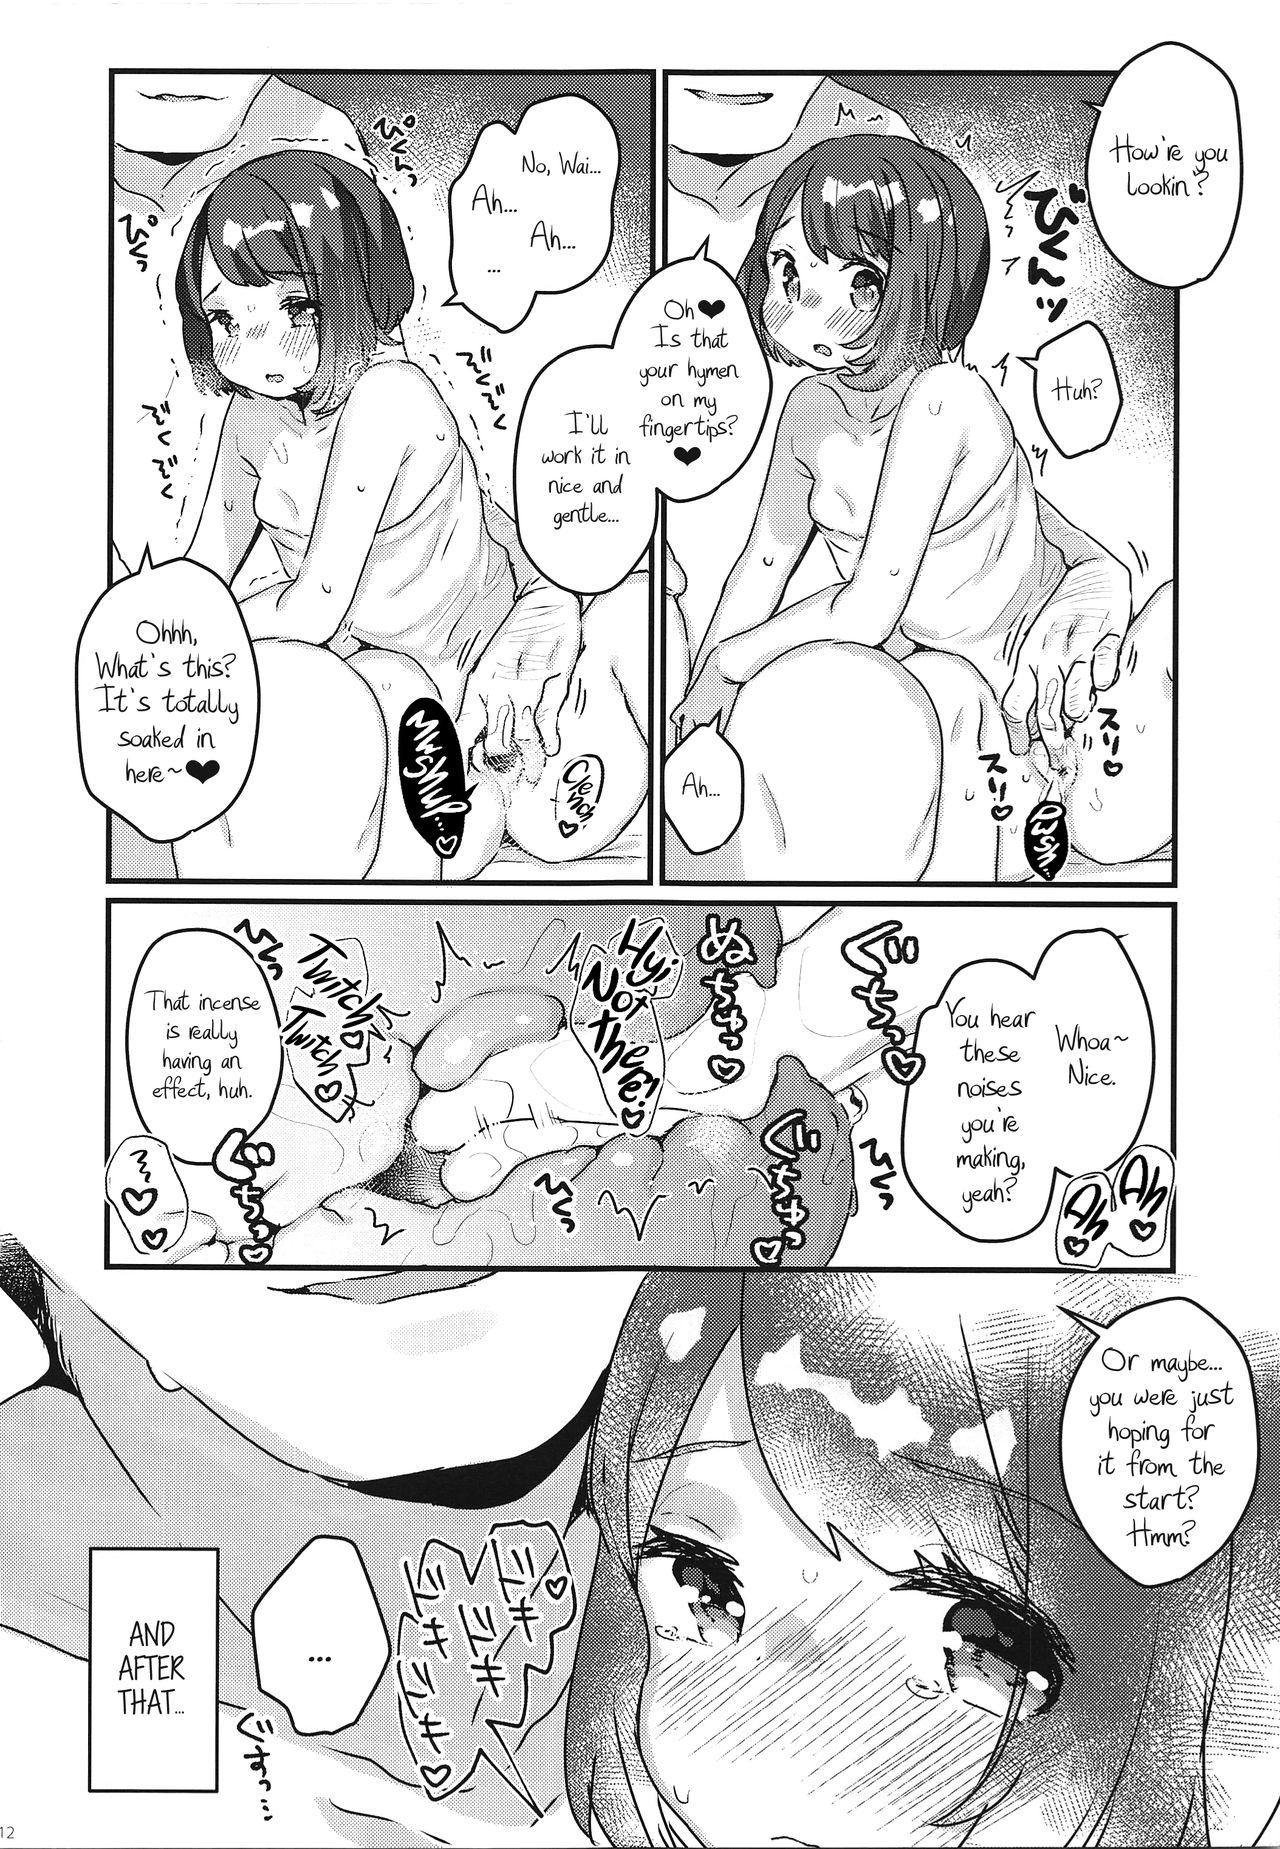 Emo "Datte Fuku, Taka Iindamon" | "I Mean, Clothes Are Just so Expensive~" - Pokemon Asses - Page 12